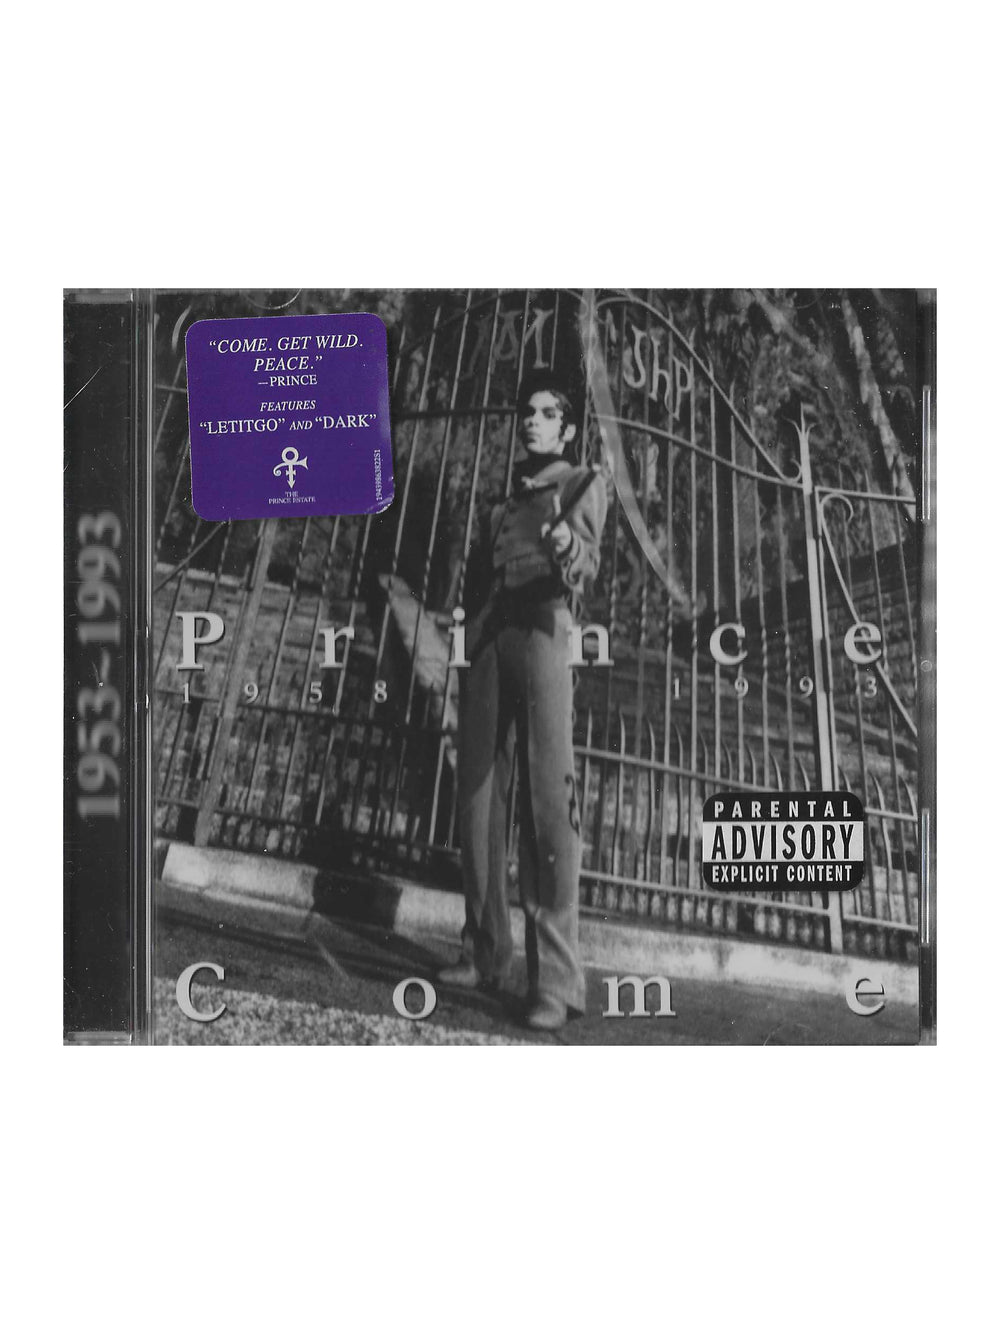 Prince – Come CD Compact Disc Reissue 2022 Sony Legacy NPG Records WRONG DATE